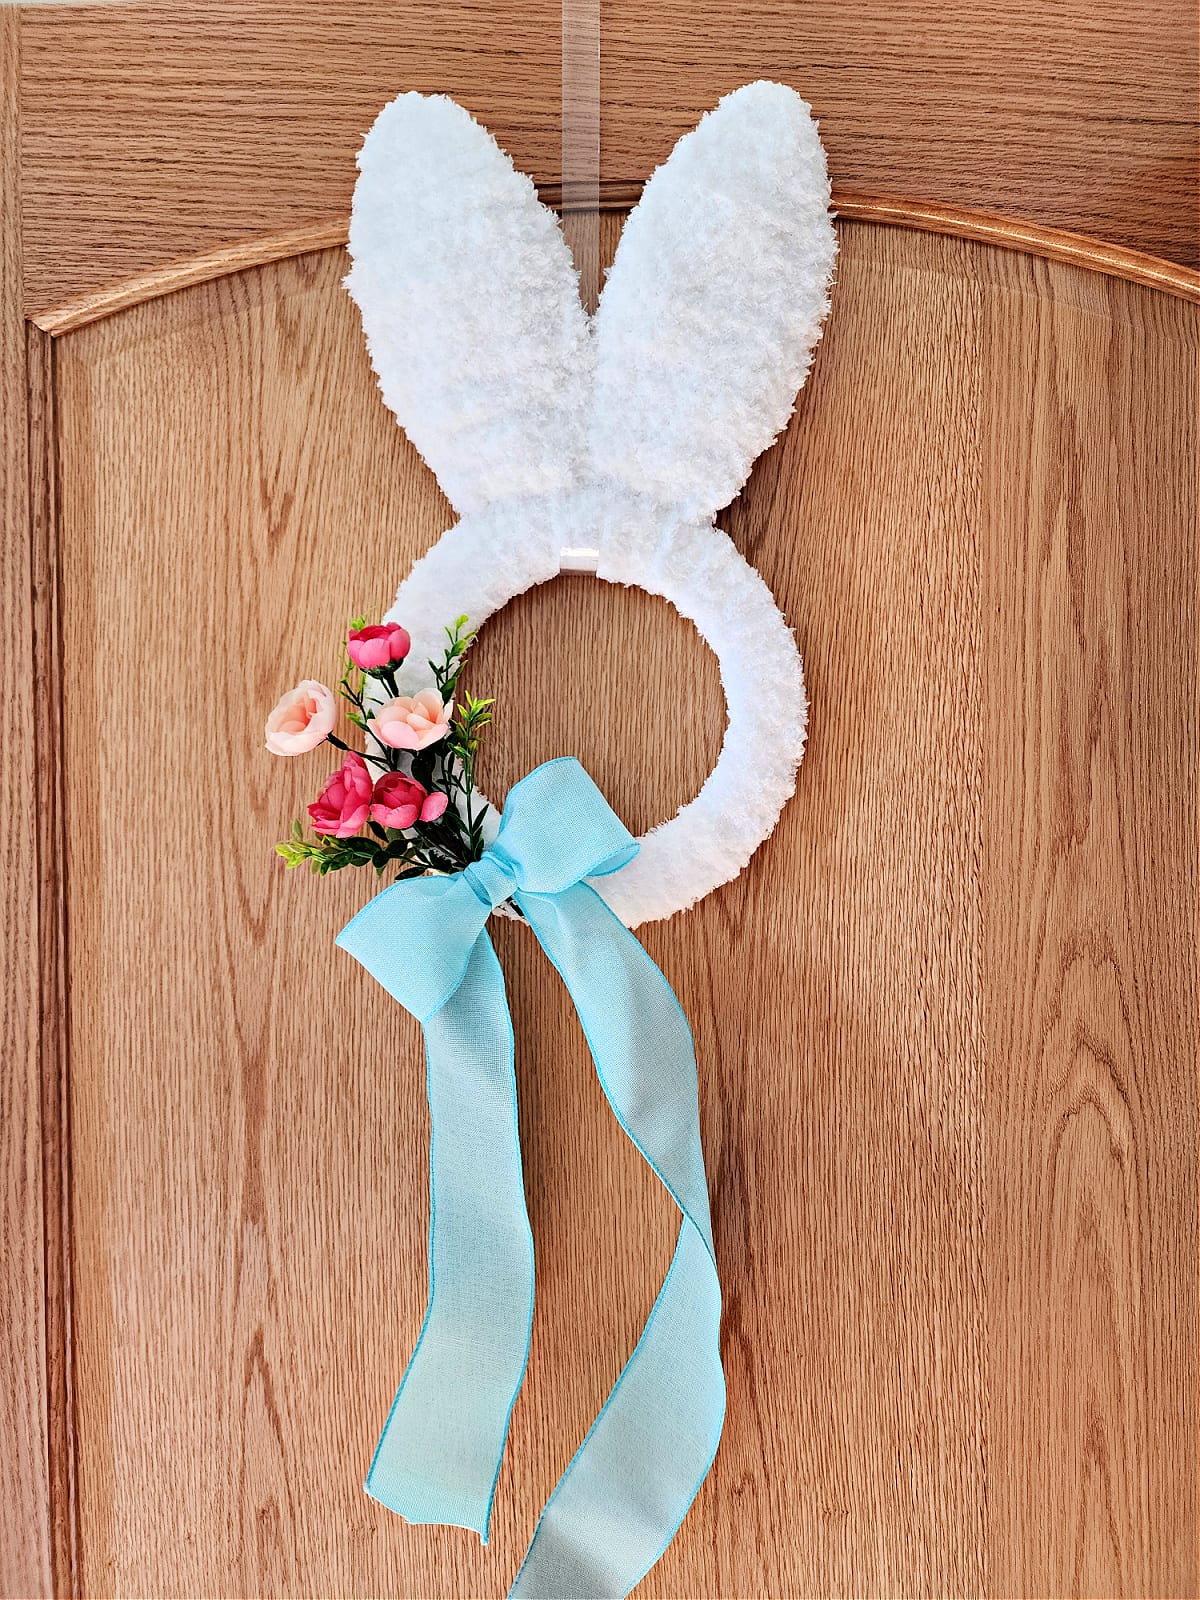 Crochet bunny wreath with flowers and bow hanging on wood door.